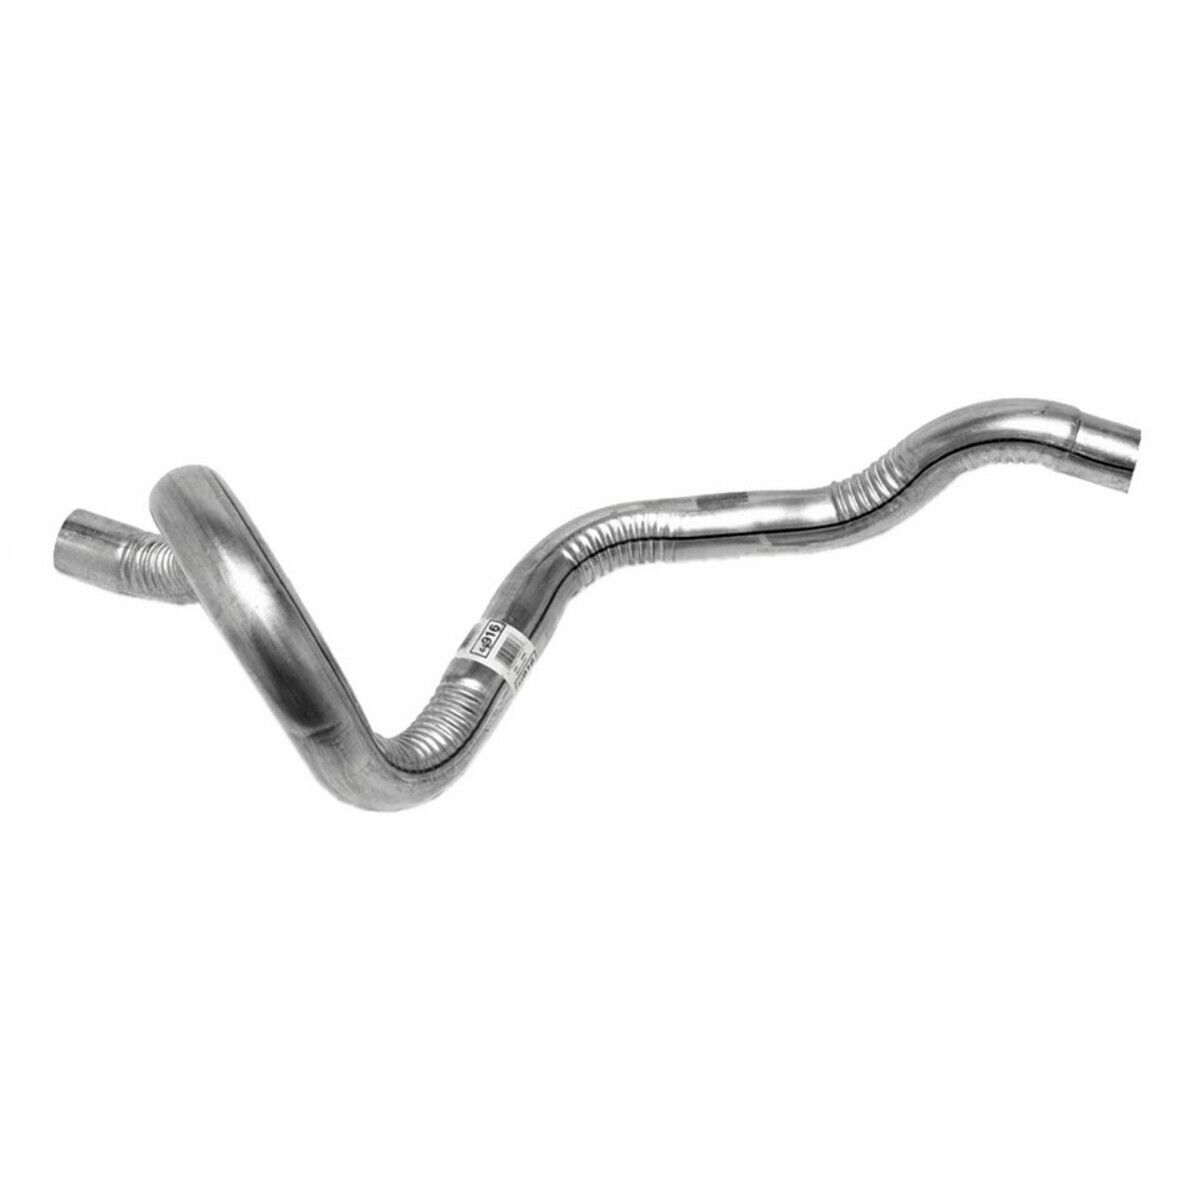 44916 Walker Exhaust Pipe for Chevy Coupe Sedan Chevrolet Impala Caprice Buick